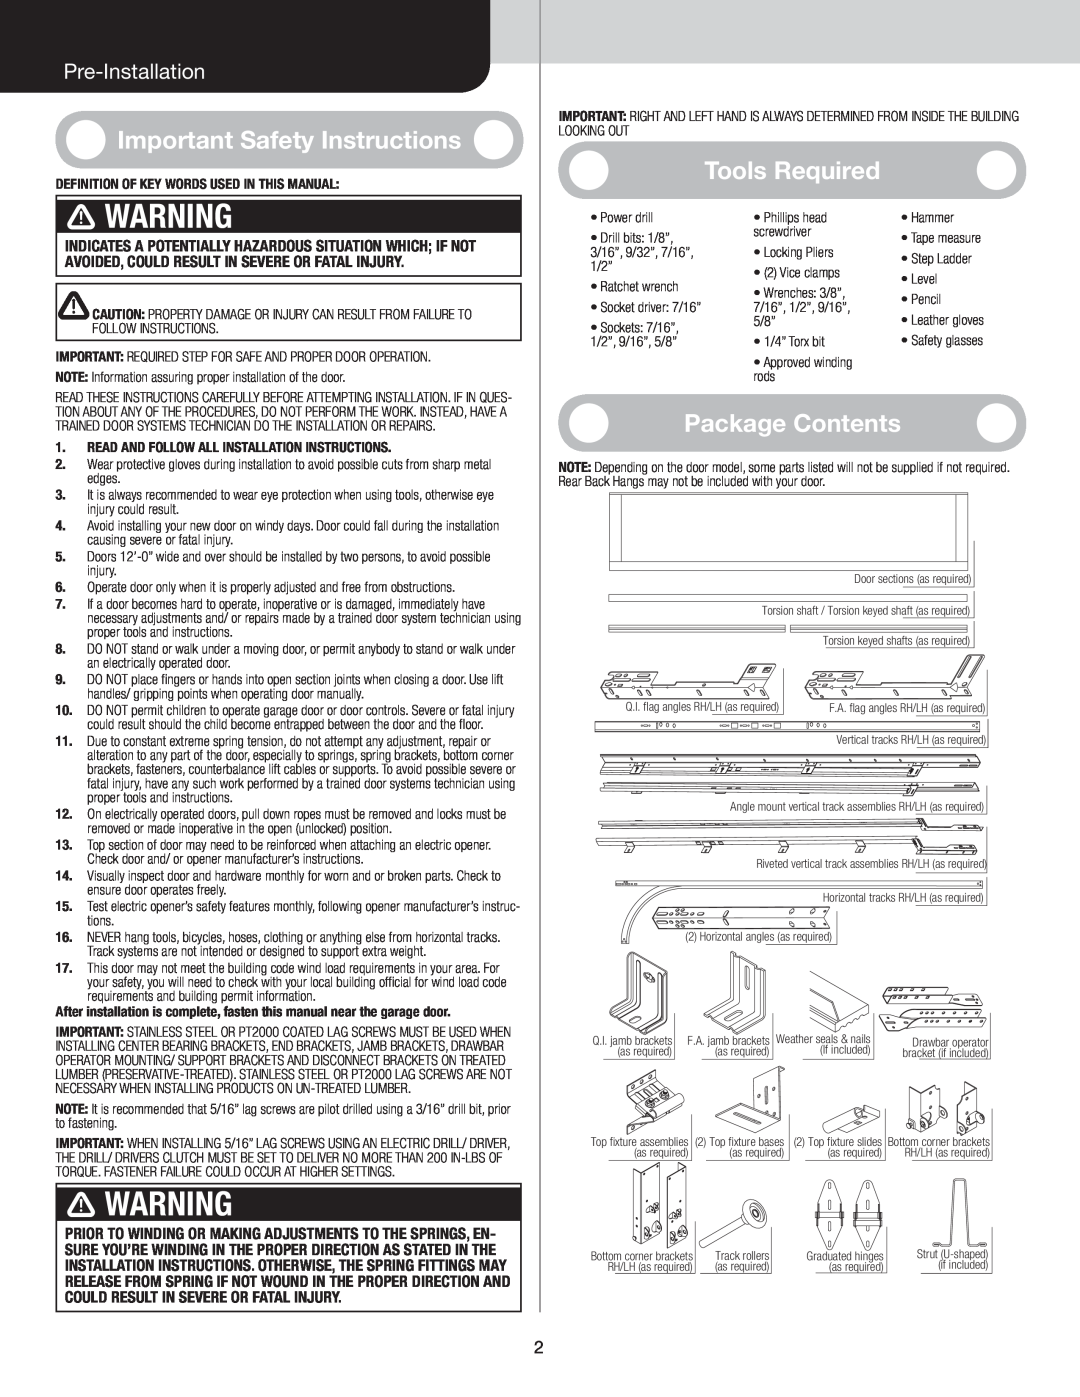 Wayne-Dalton 6600 WarningARNING, Important Safety Instructions, Tools Required, Package Contents, Pre-Installation 